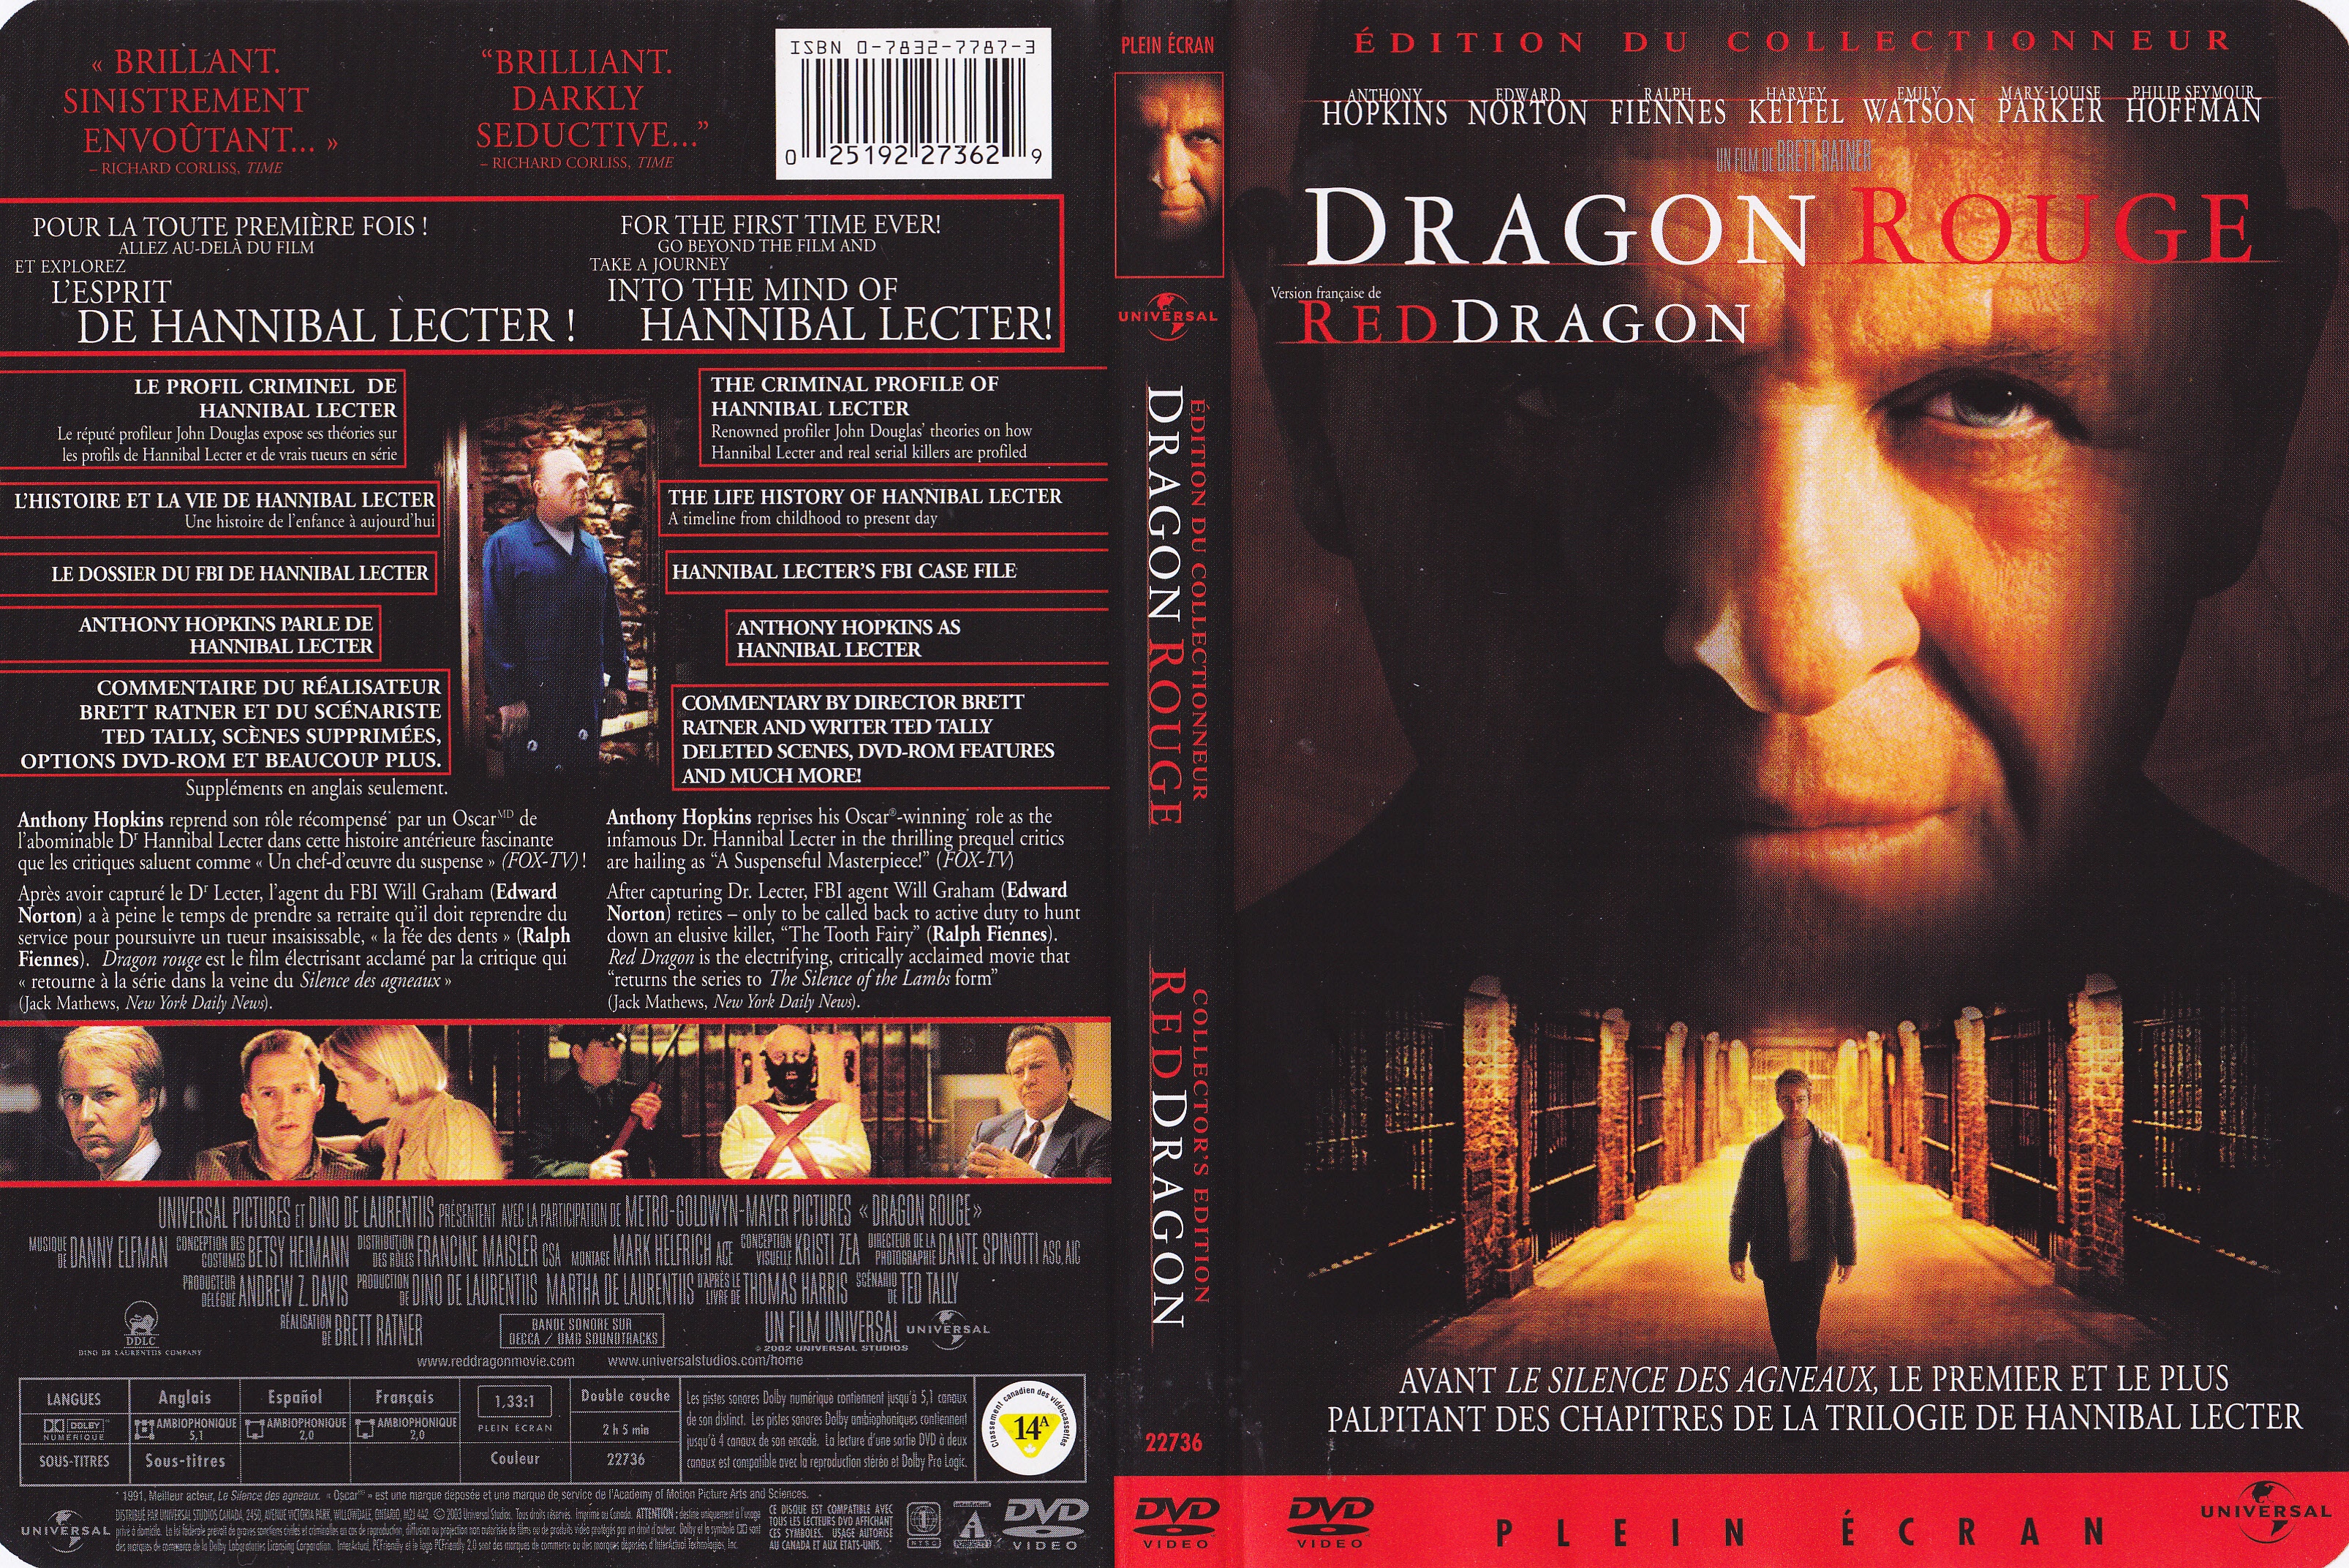 Jaquette DVD Dragon Rouge - Red dragon (Canadienne)